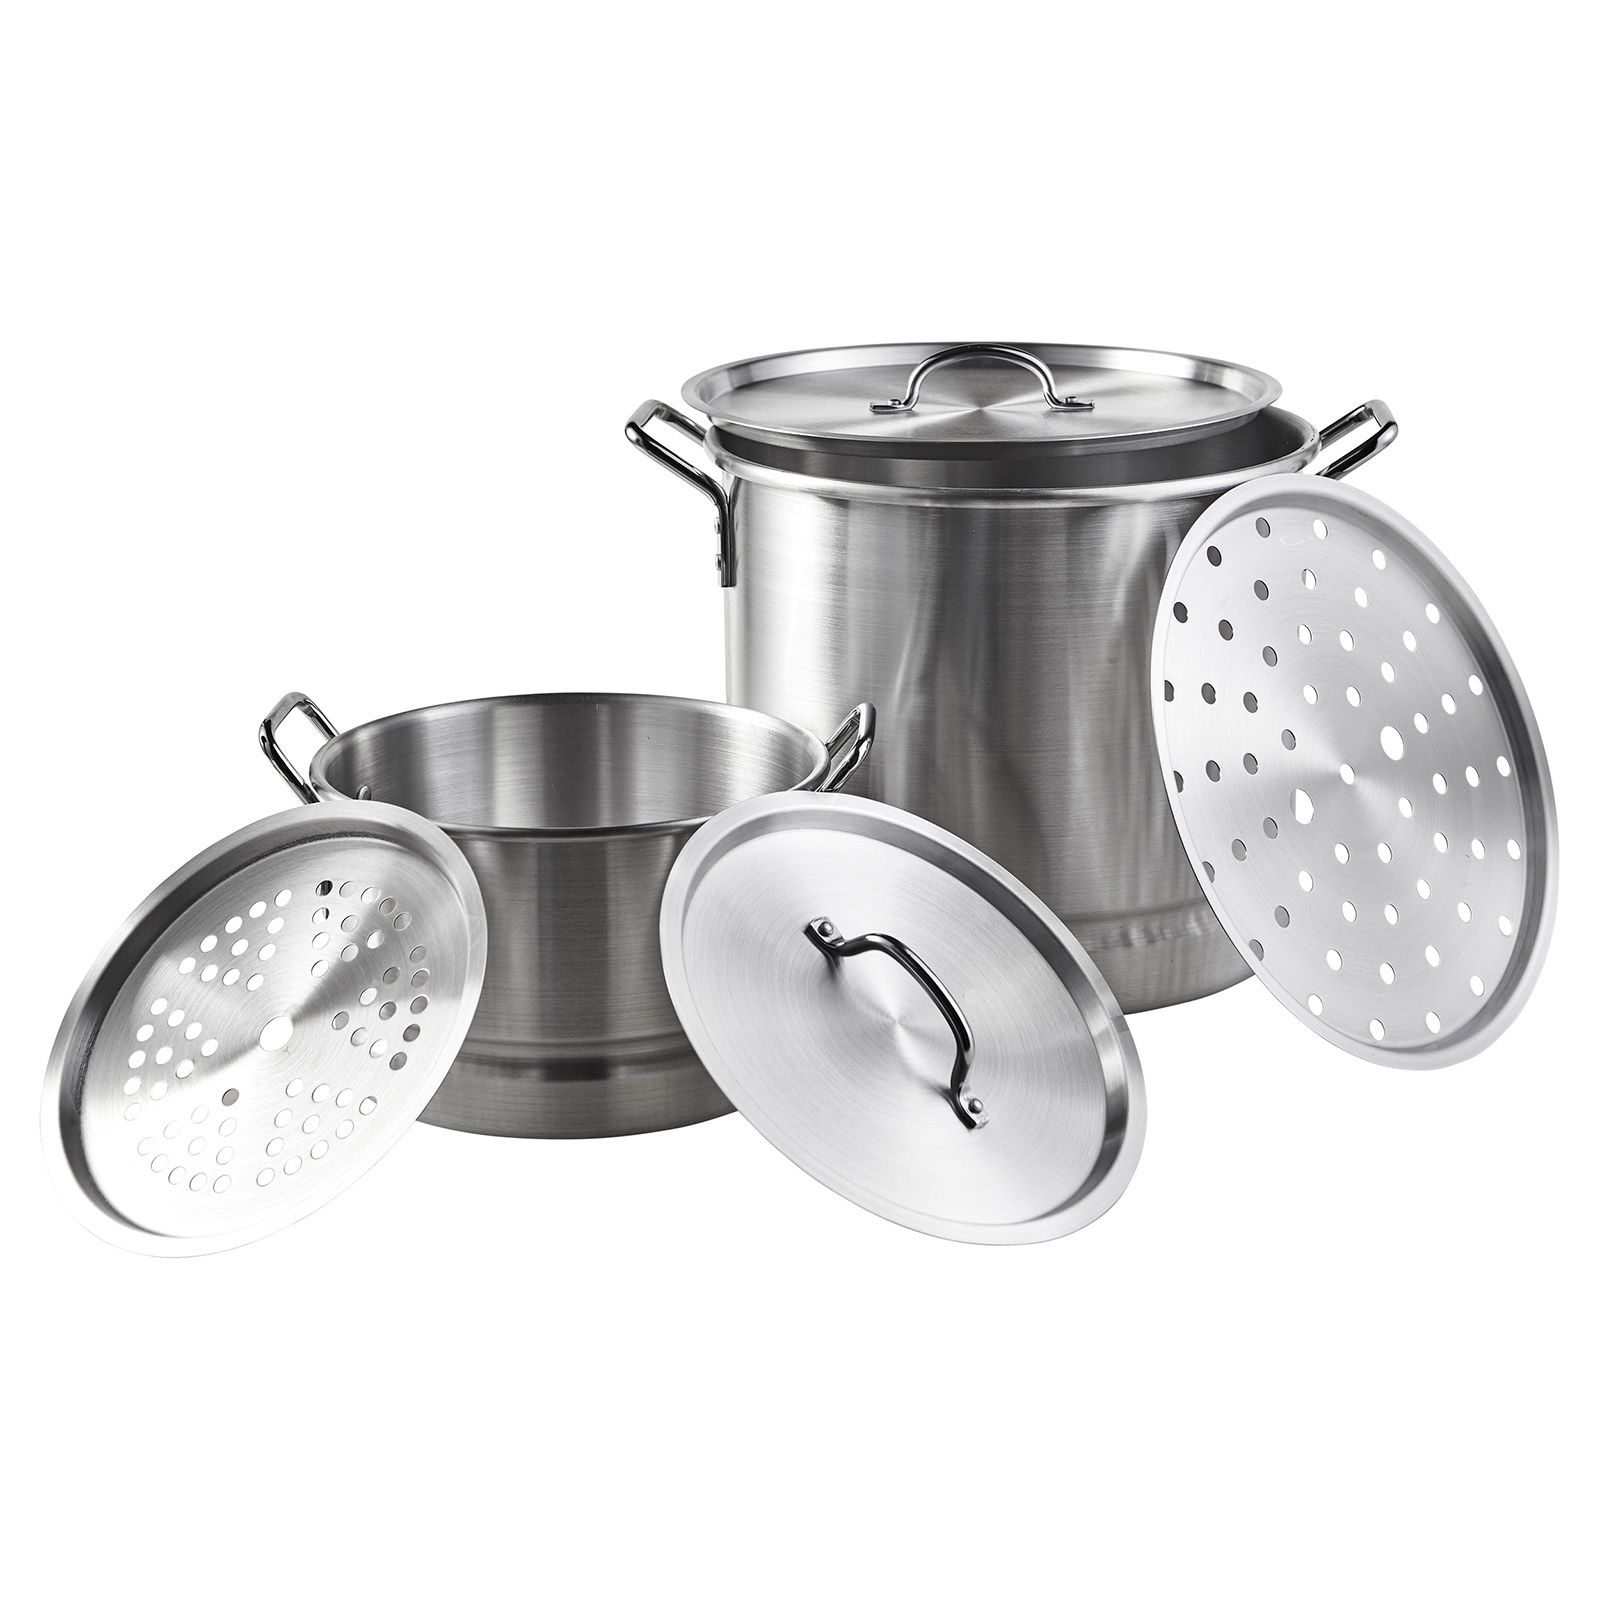 Imusa Tamale/Seafood Steamer with Lid & Insert - Shop Stock Pots